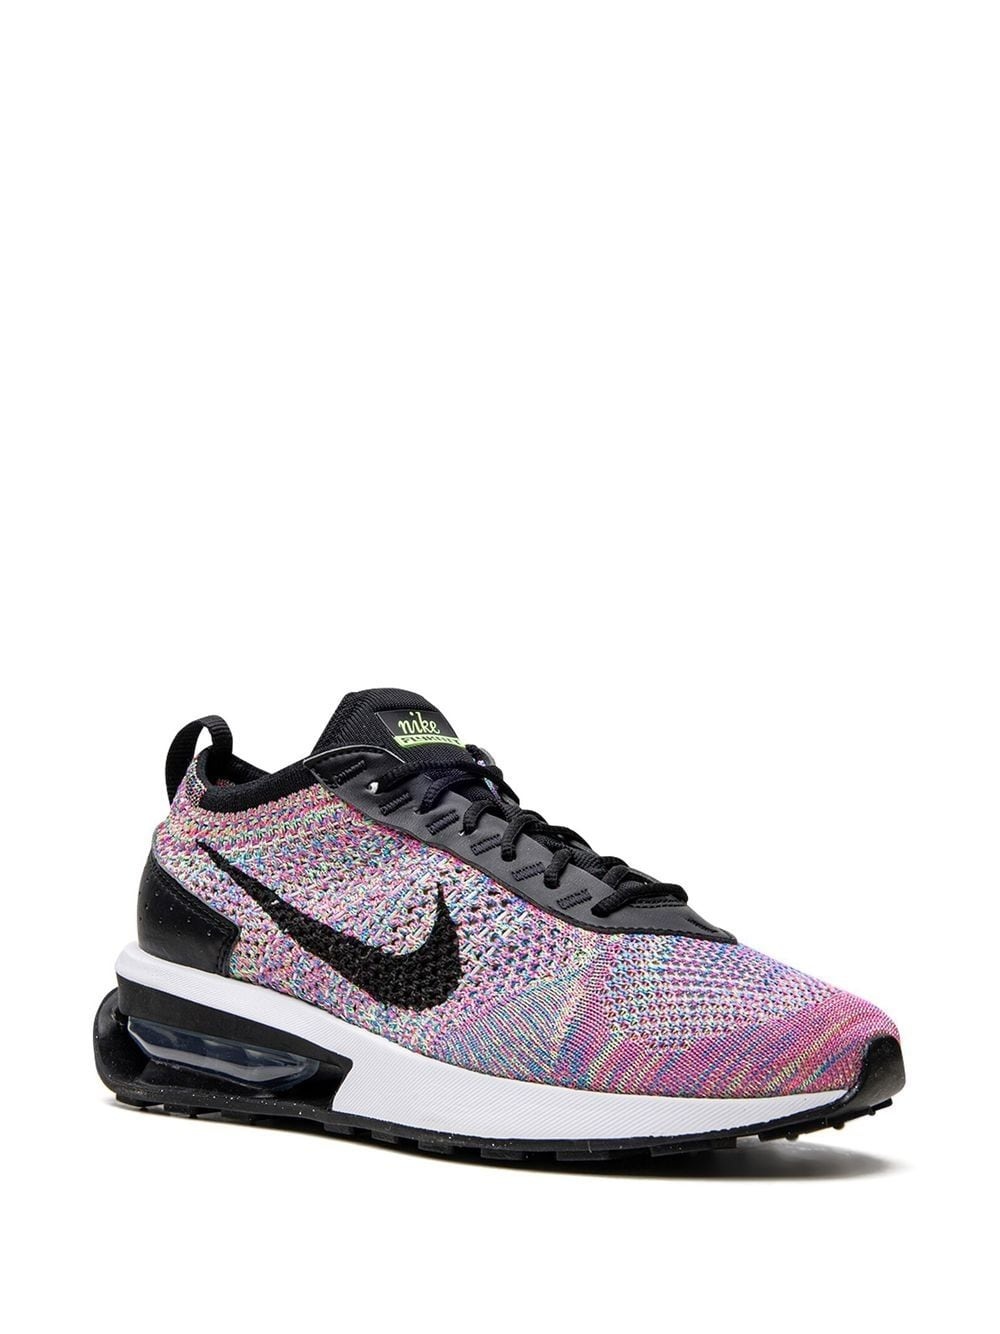 Air Max Flyknit Racer "Multicolor" sneakers - 2